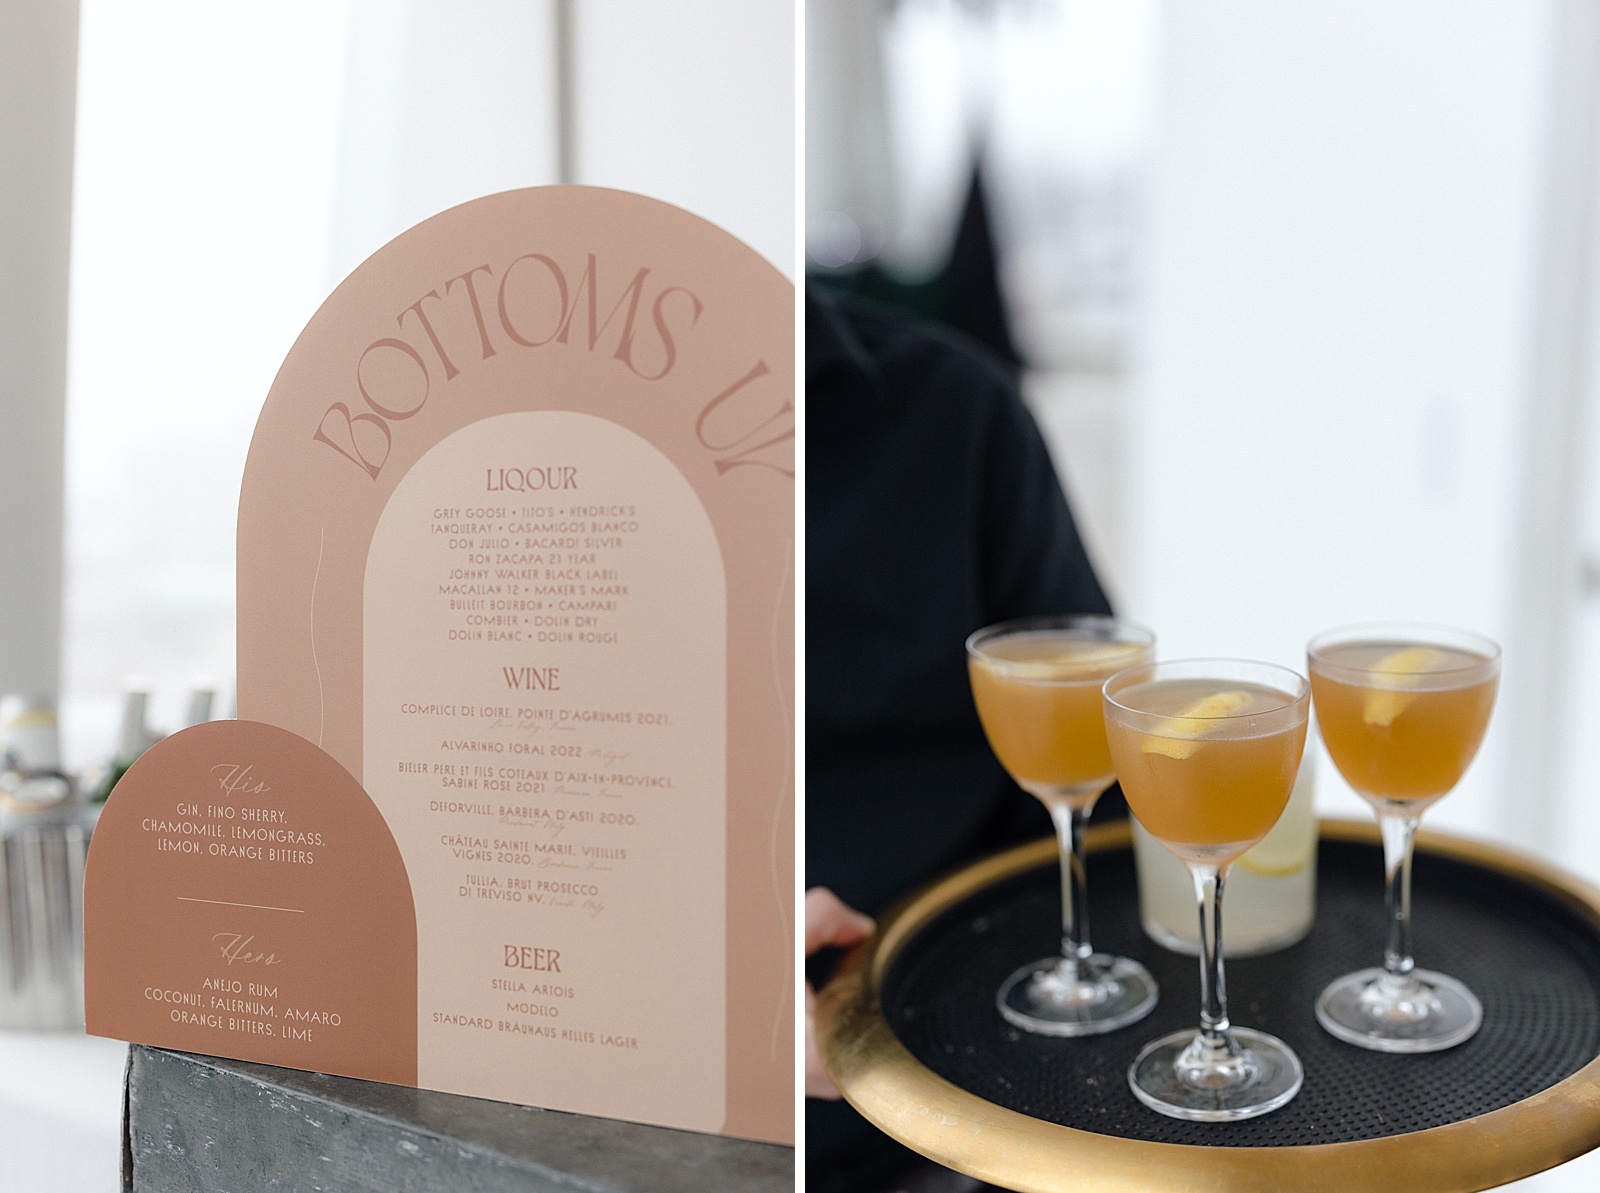 Left photo: Shot of the couple's custom bar menu sign. 
Right photo: Close up shot of cocktails being served on a tray. 